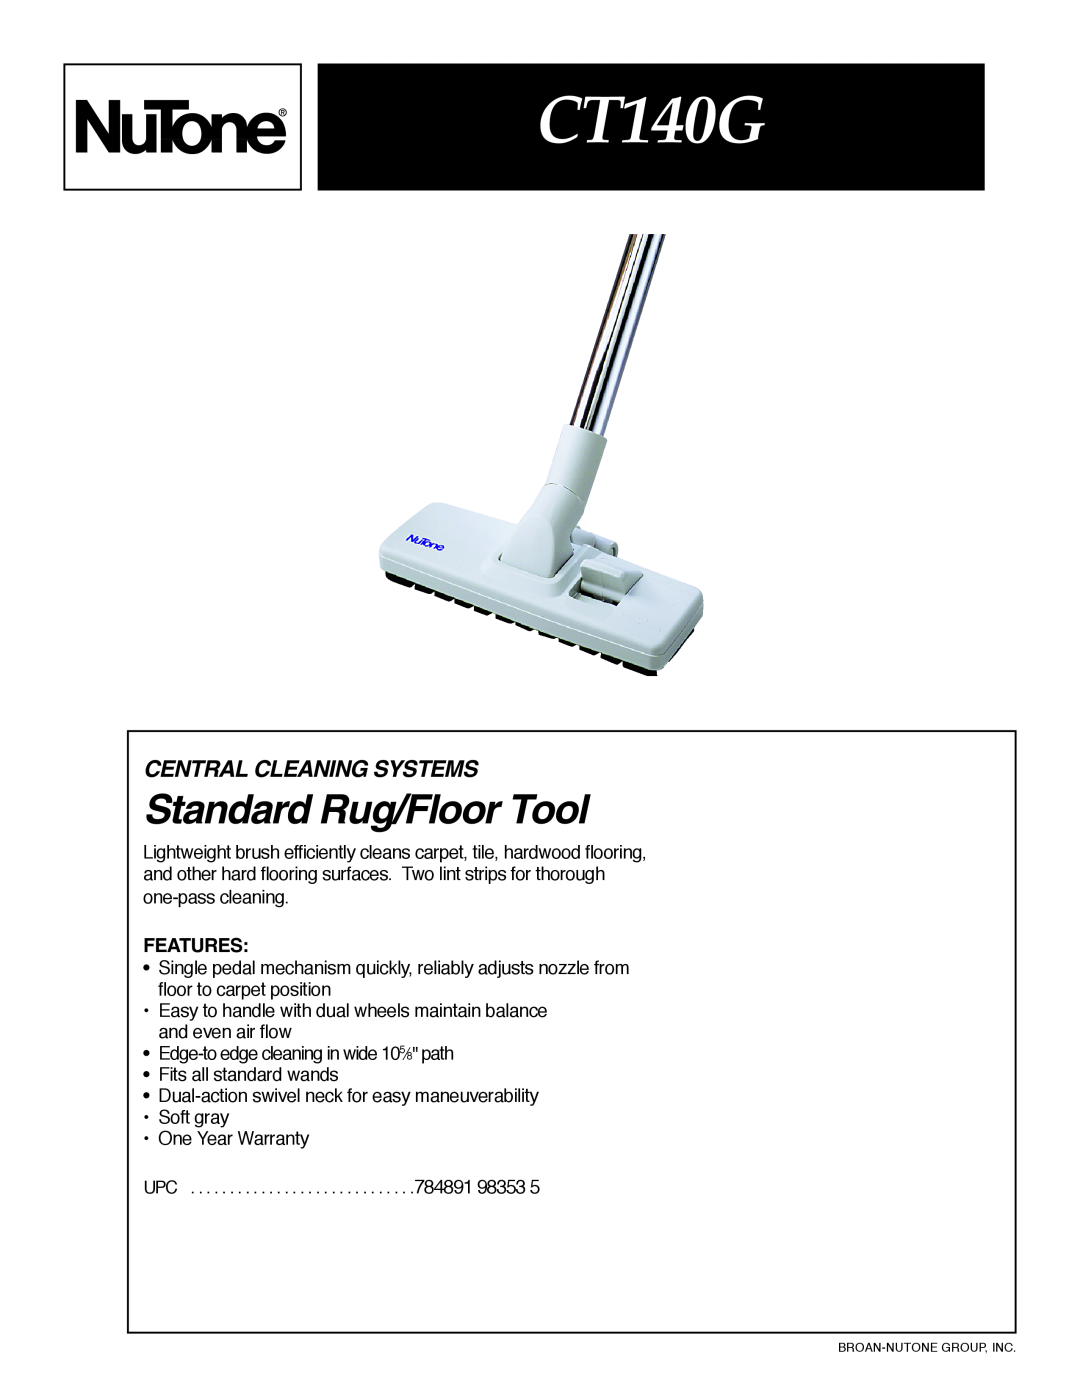 NuTone UPC# 784891983535 warranty CT140G, Standard Rug/Floor Tool, Central Cleaning Systems, Features 